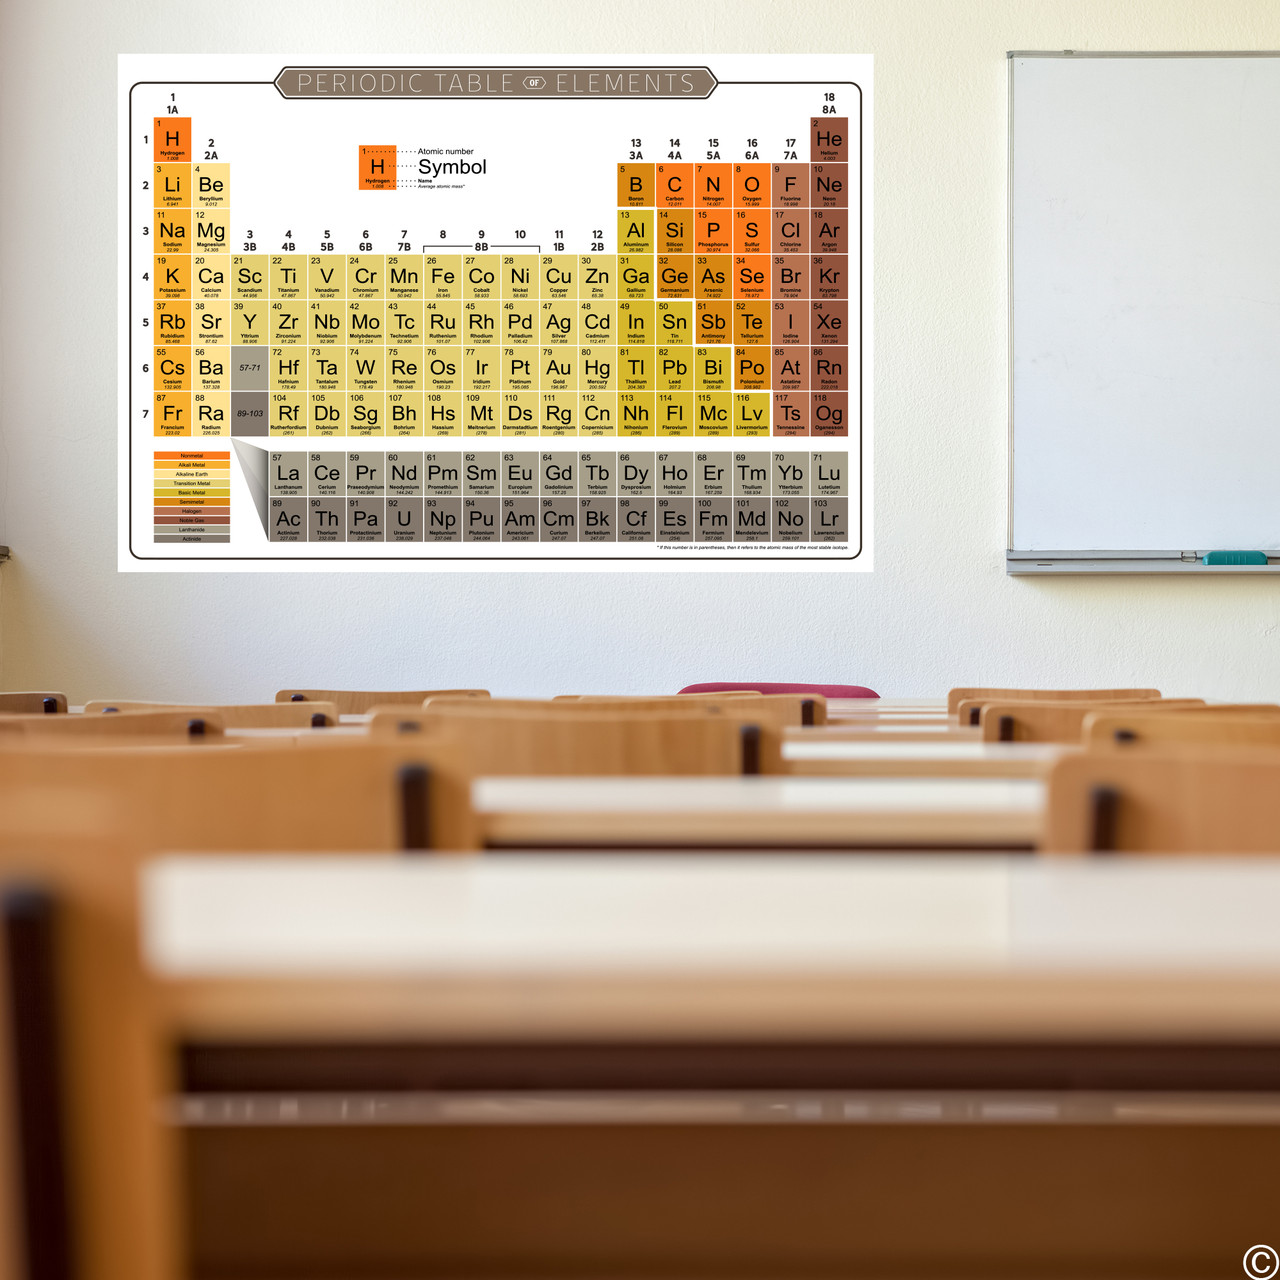 High quality print of the Periodic Table of Elements in an Earth color theme. Pick from 3 paper types and many sizes including standard frame sizes. Also available as a removable wall decal.